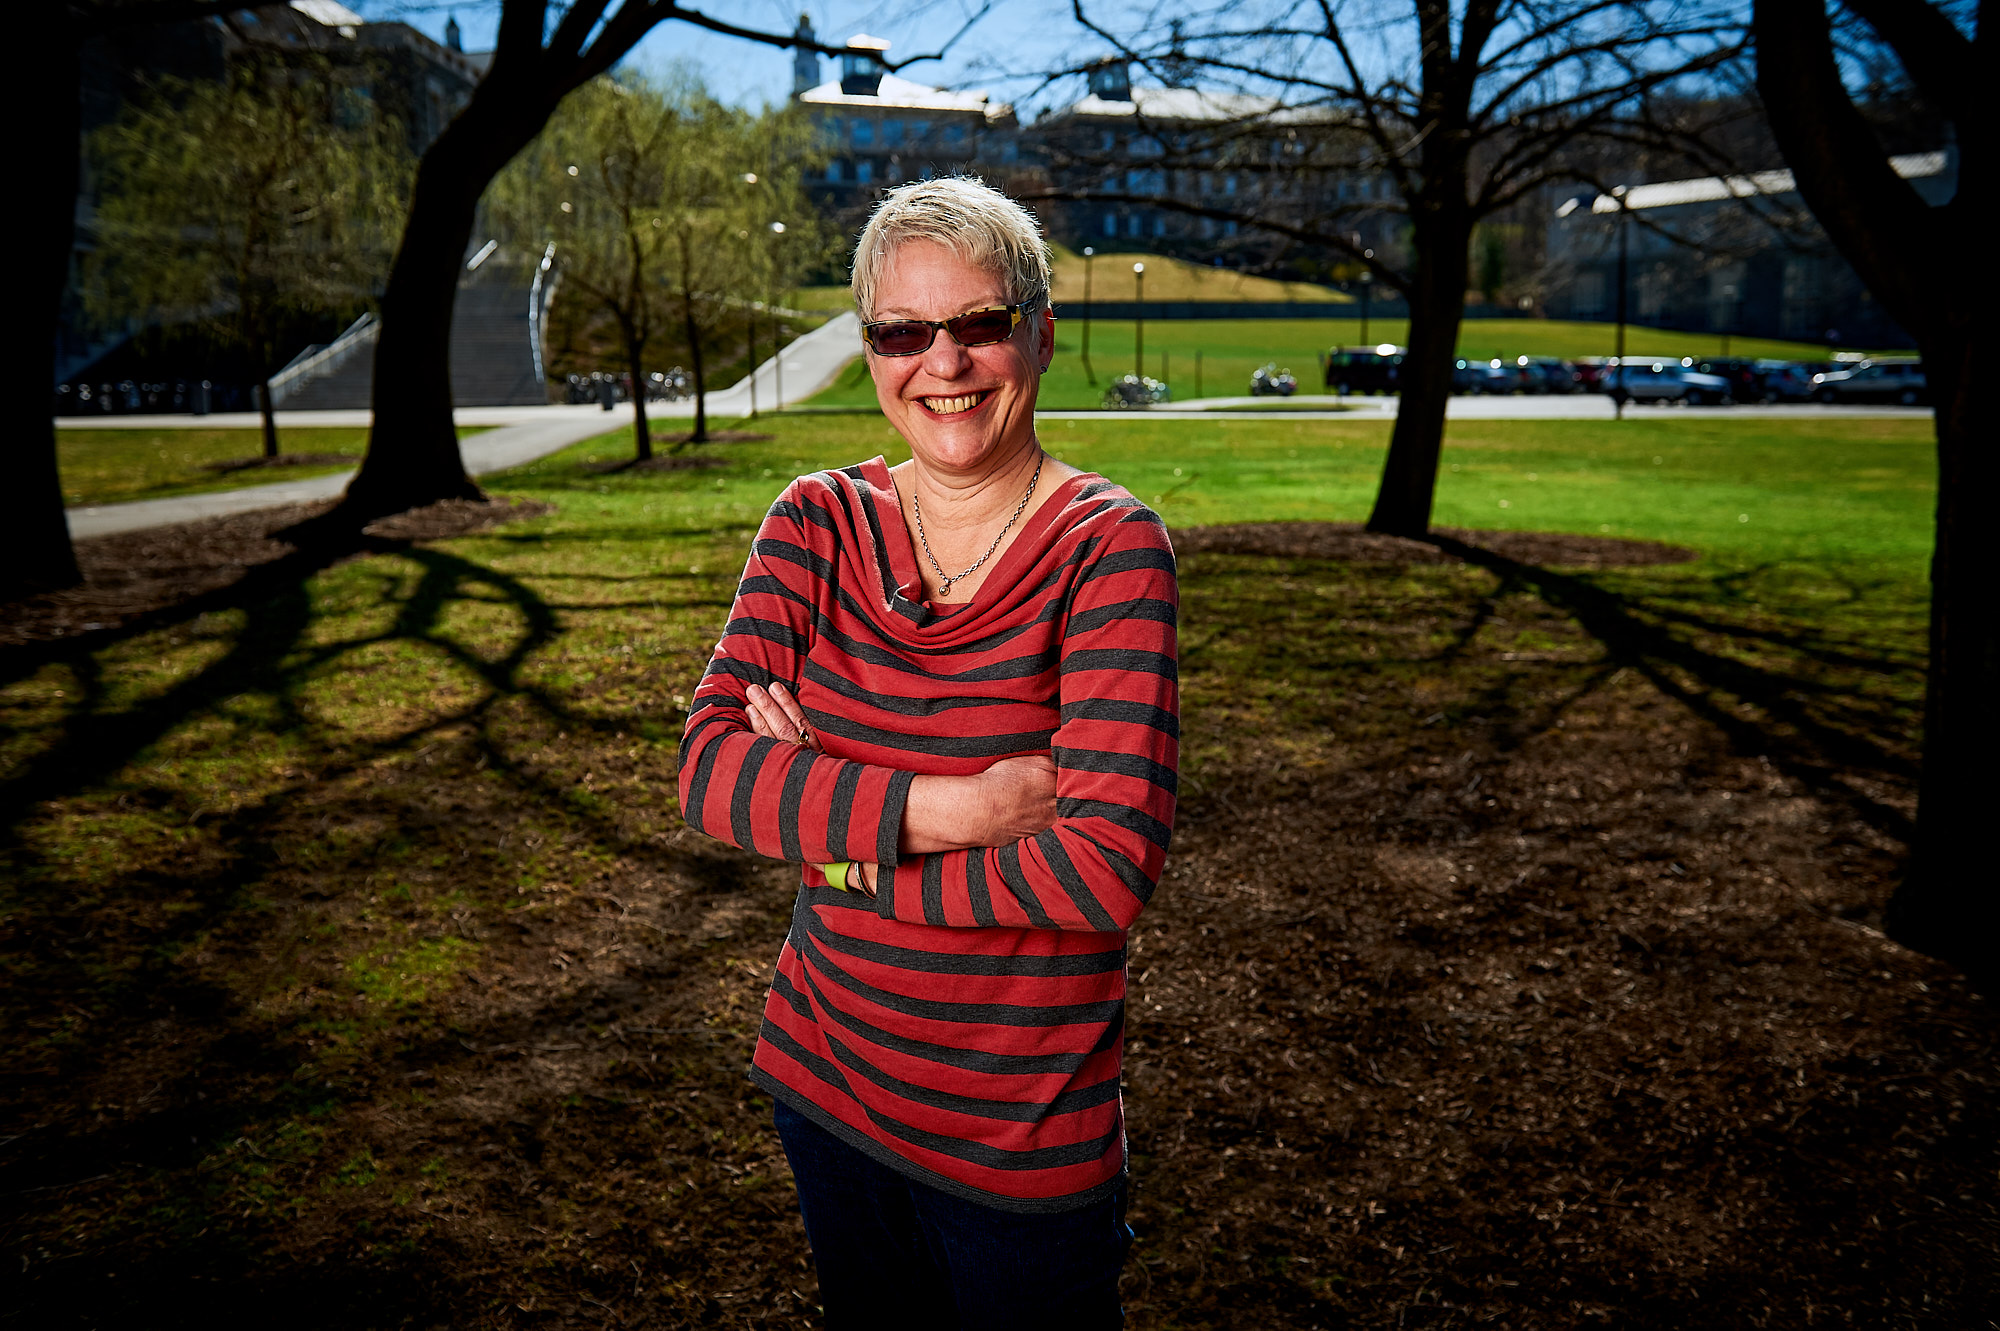 Kathy High, Associate Professor of Video and New Media at Rensselaer Polytechnic Institute, photographed on the Colgate University Campus